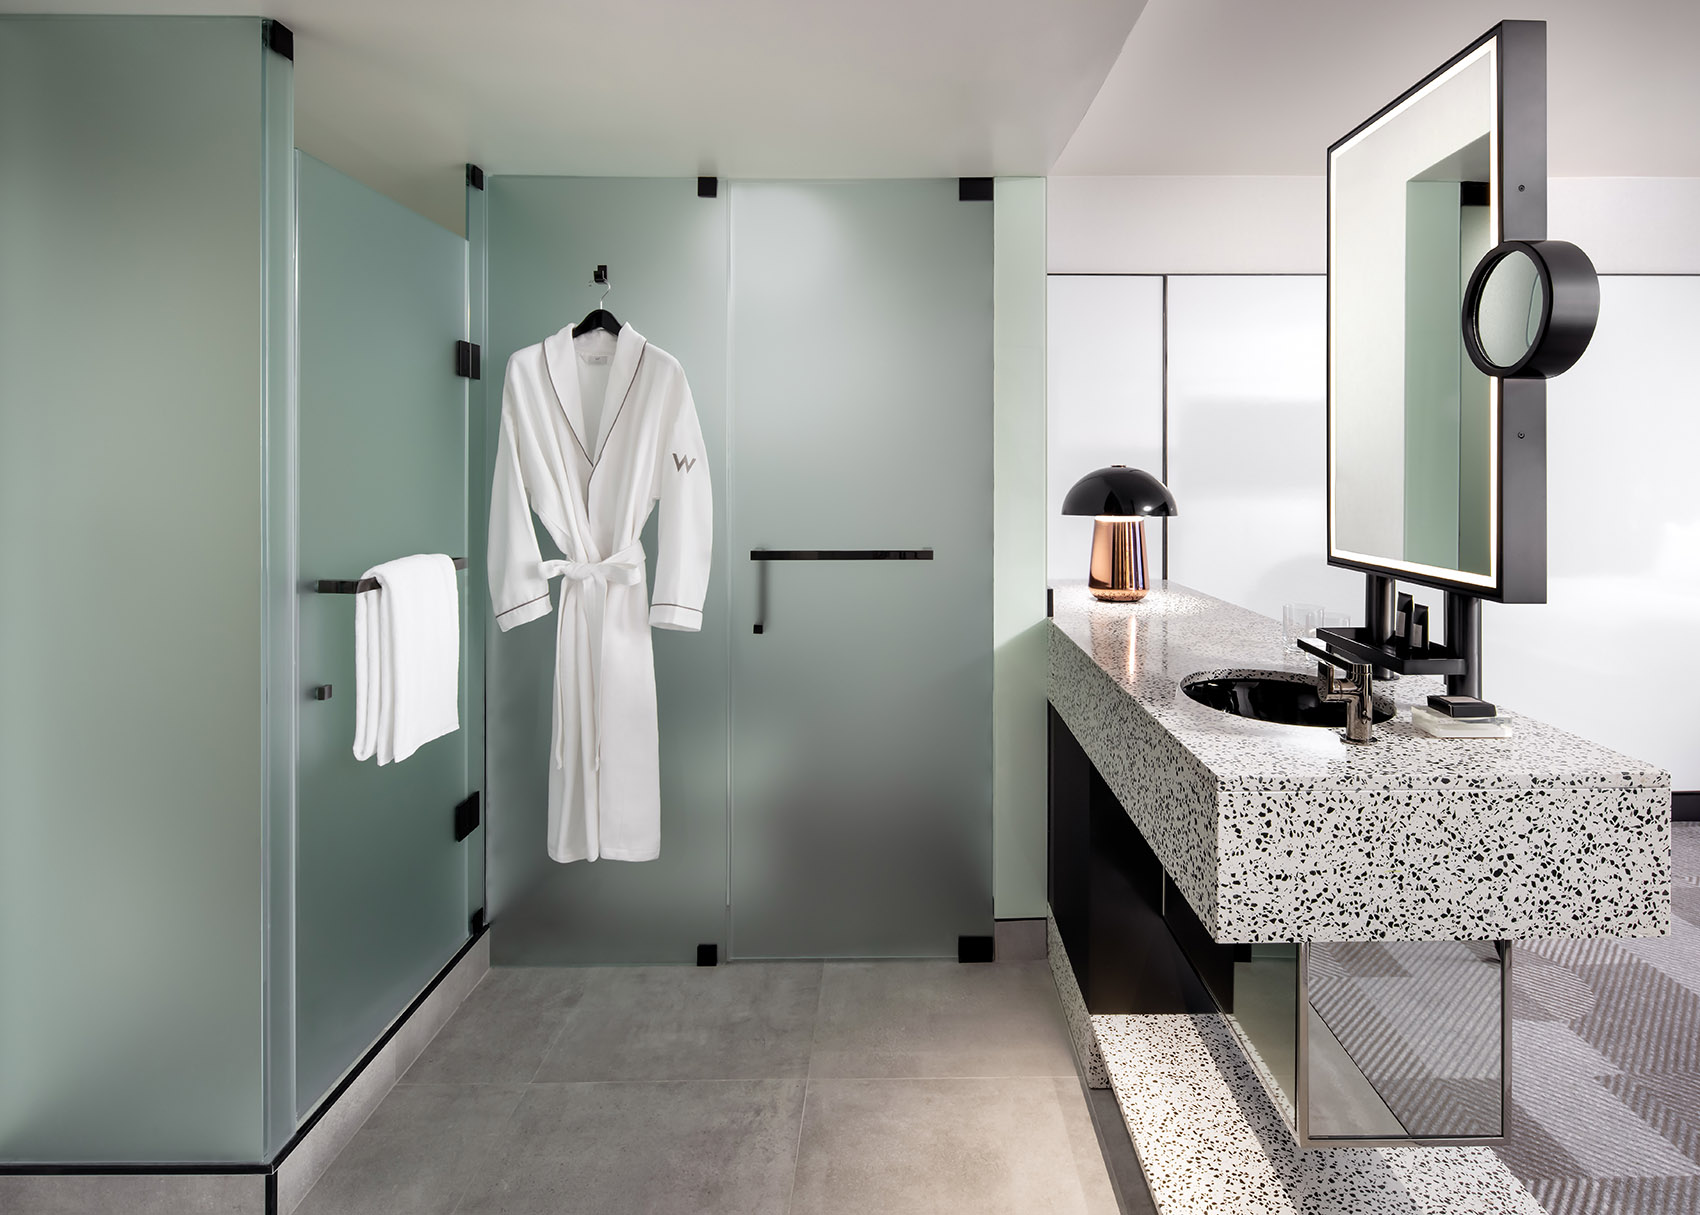 008 W Hotel Toronto By Sid Lee Architecture 